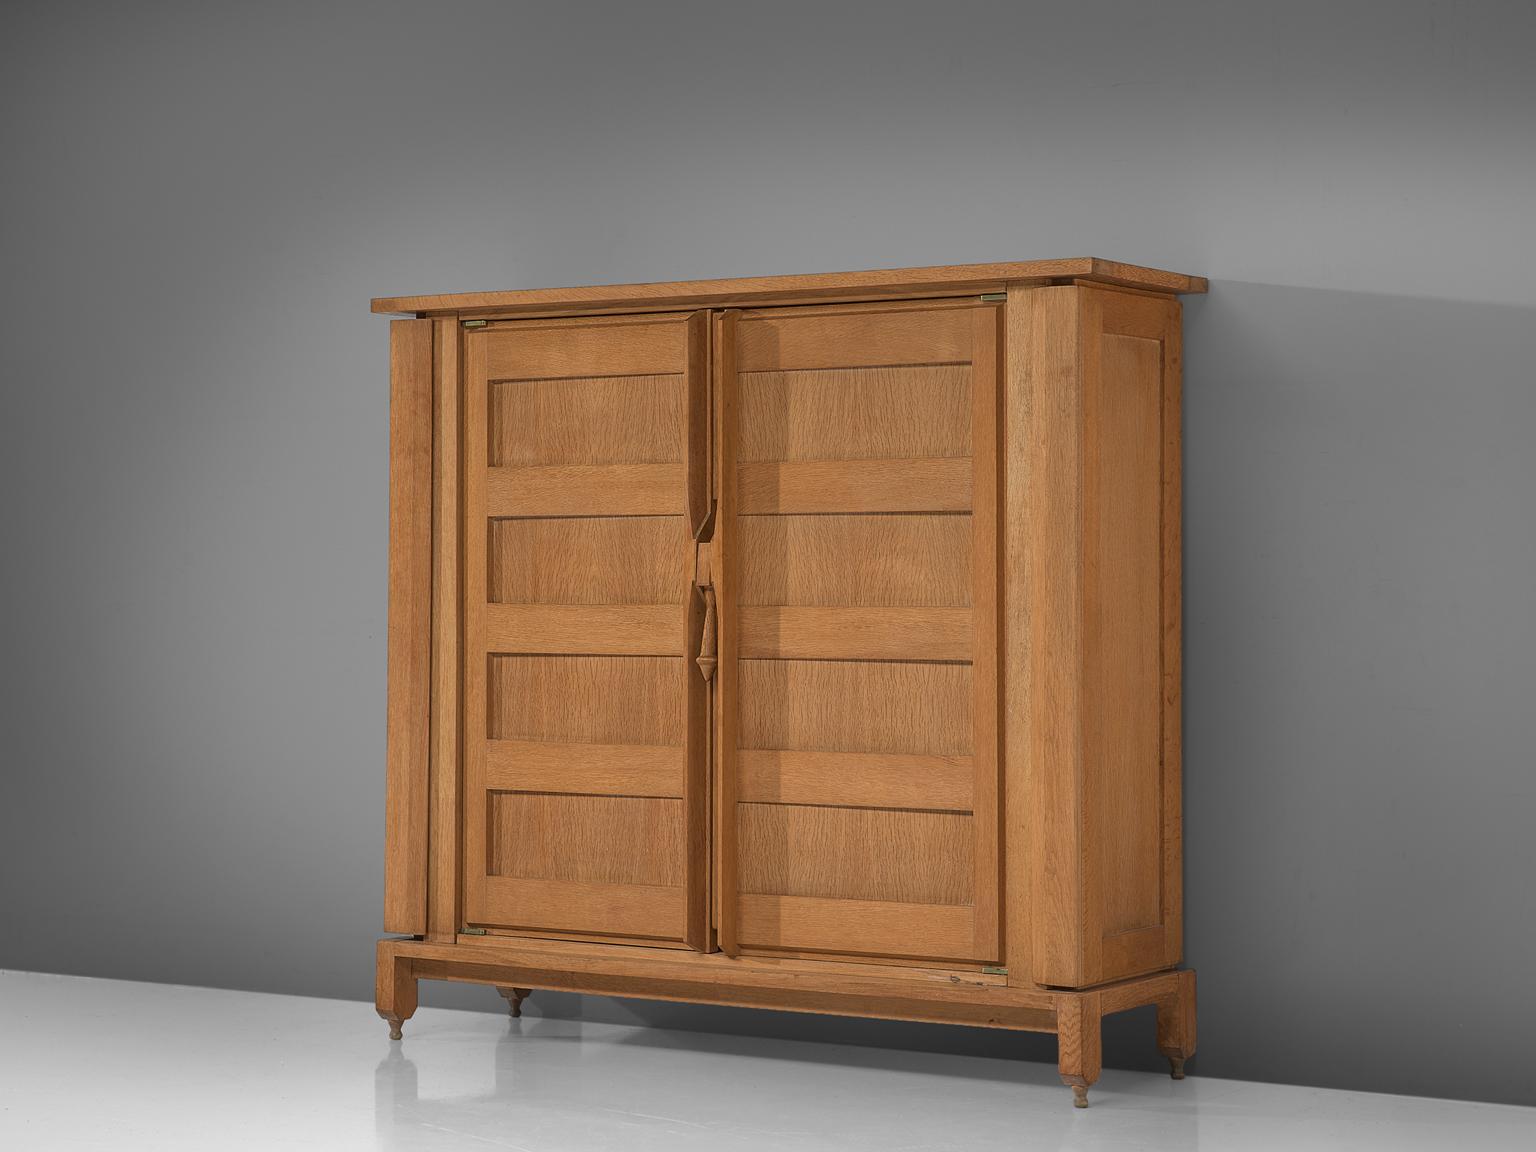 Guillerme and Chambron for Votre Maison, cabinet, oak, France, circa 1970.

This case piece is designed by Guillerme and Chambron and features geometric engravings in the doors. The cabinet offers plenty of storage, including 'hidden' compartments